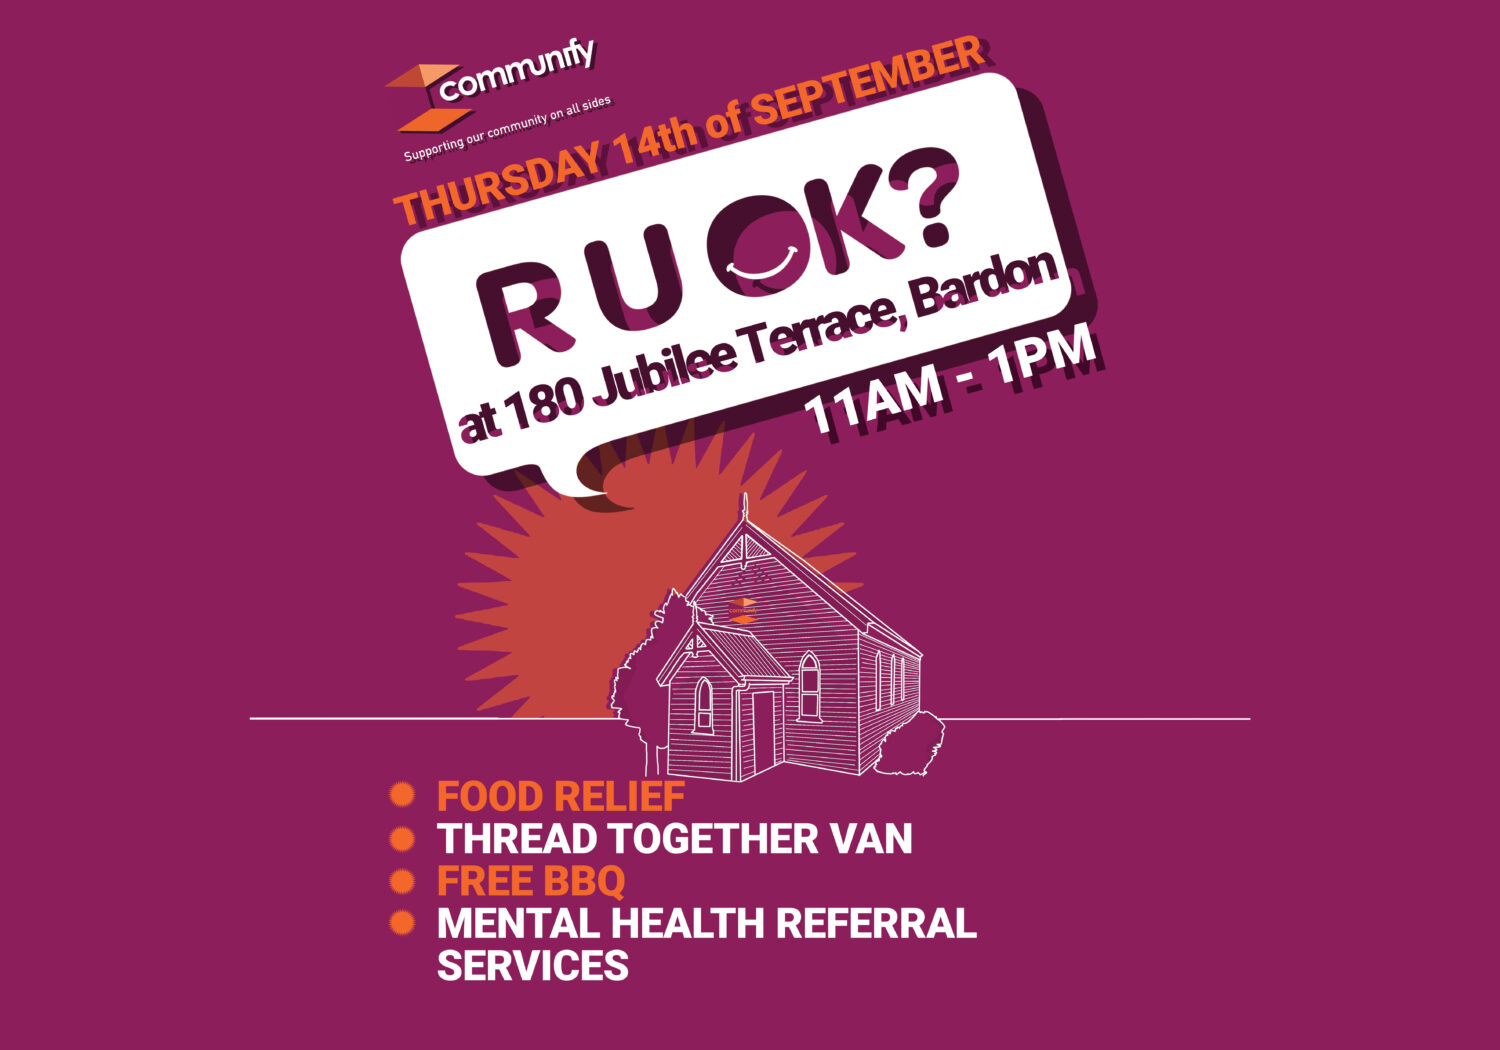 R U OK Day at 180 Jubilee Tce, Bardon. Thursday 14 September. Food relief, thread together van, Free food, Mental health referral services.